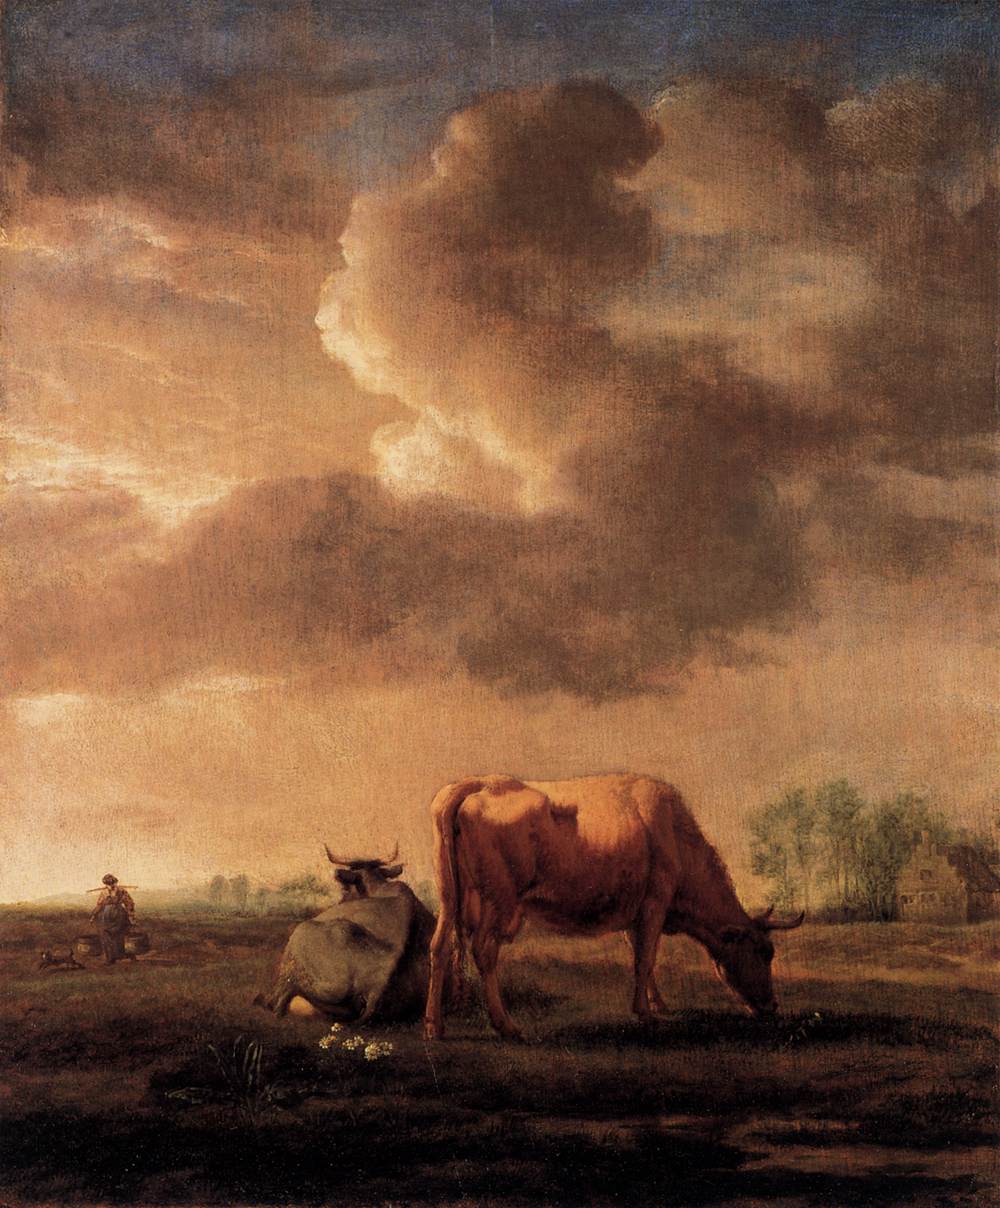 cows in a meadow